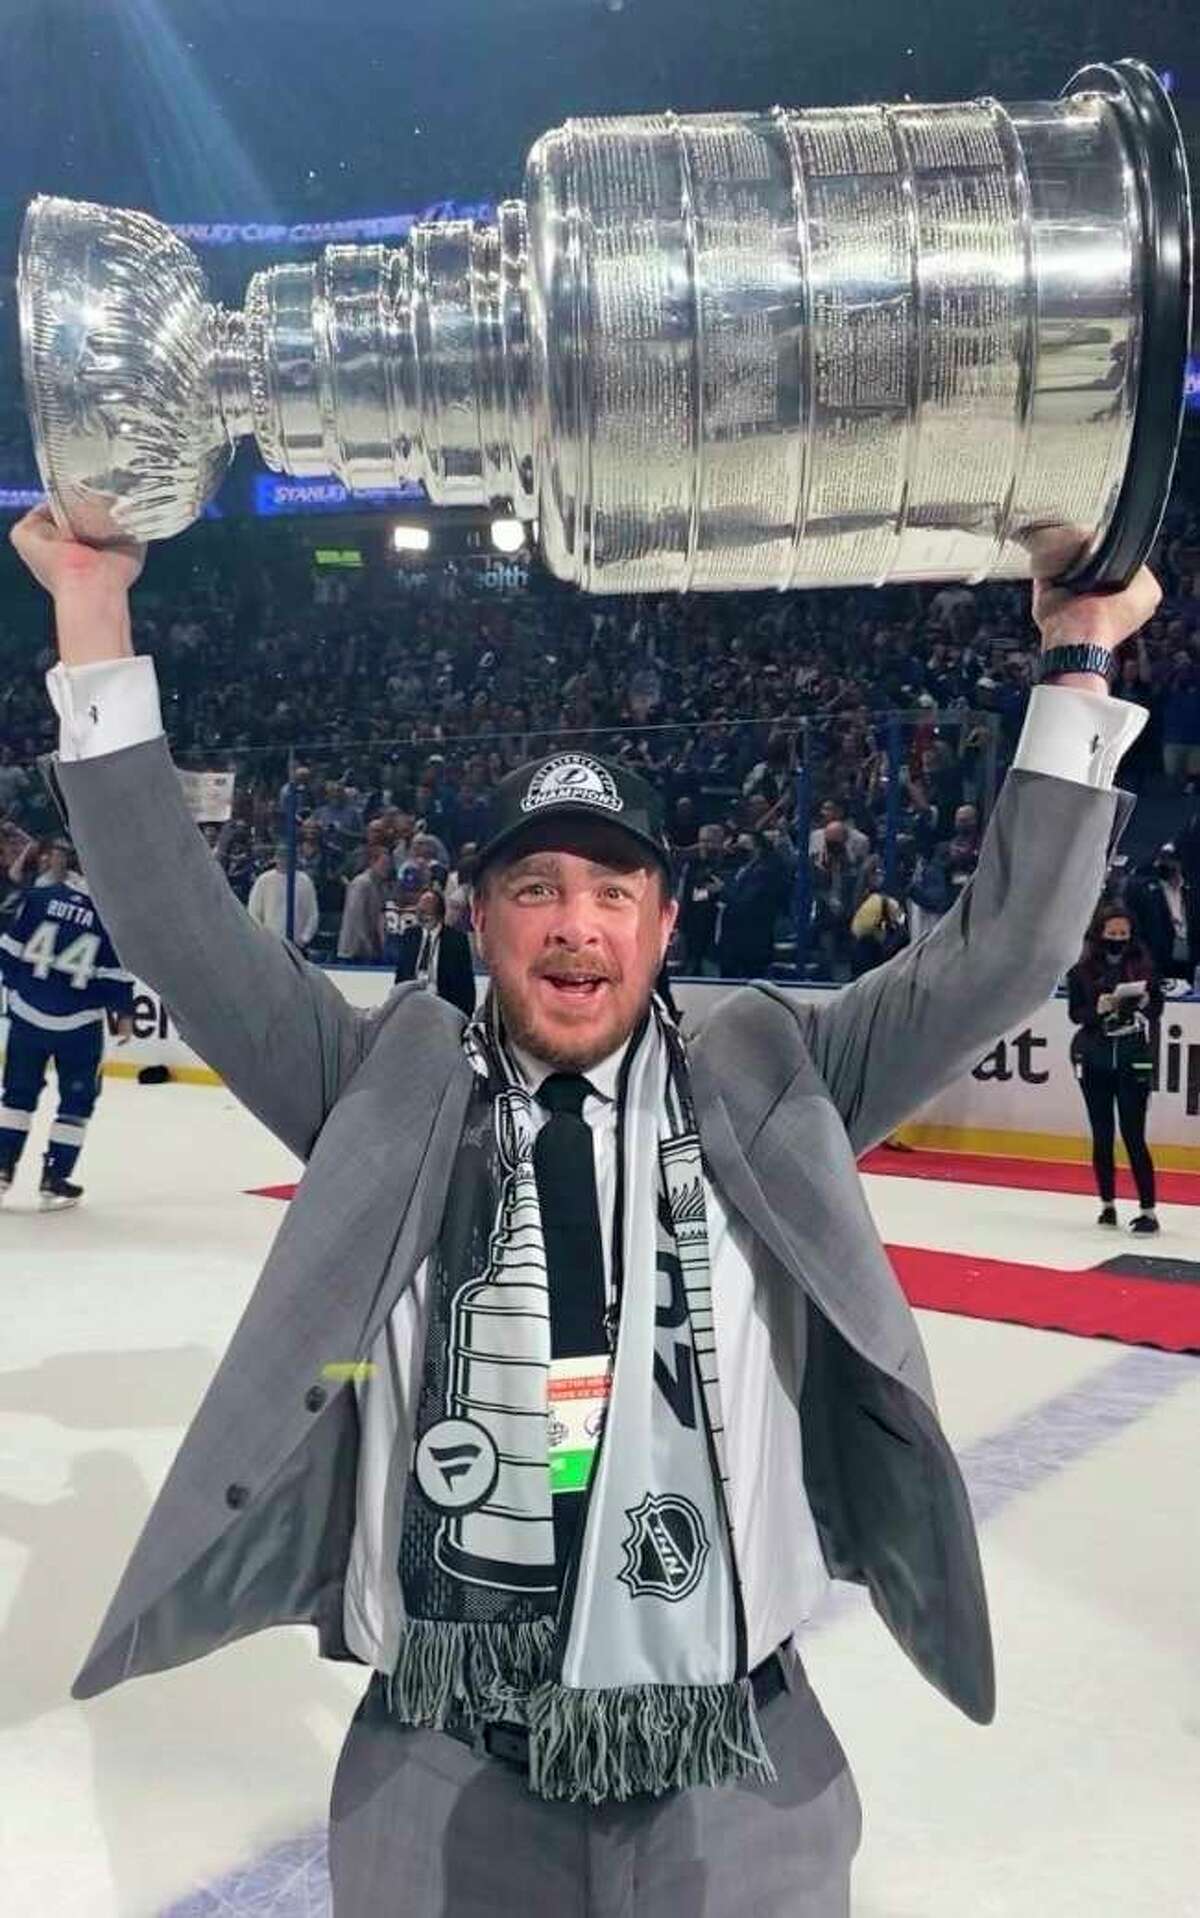 Big Rapids native Brian Garlock, in his eighth season as video coordinator with the Tampa Bay Lightning, skates with the Stanley Cup after his team won it earlier this month. He was scheduled to bring it to Big Rapids for public viewing on Sunday, but tested positive for COVID-19 late Saturday night, forcing the event's abrupt cancellation. (Courtesy photo)